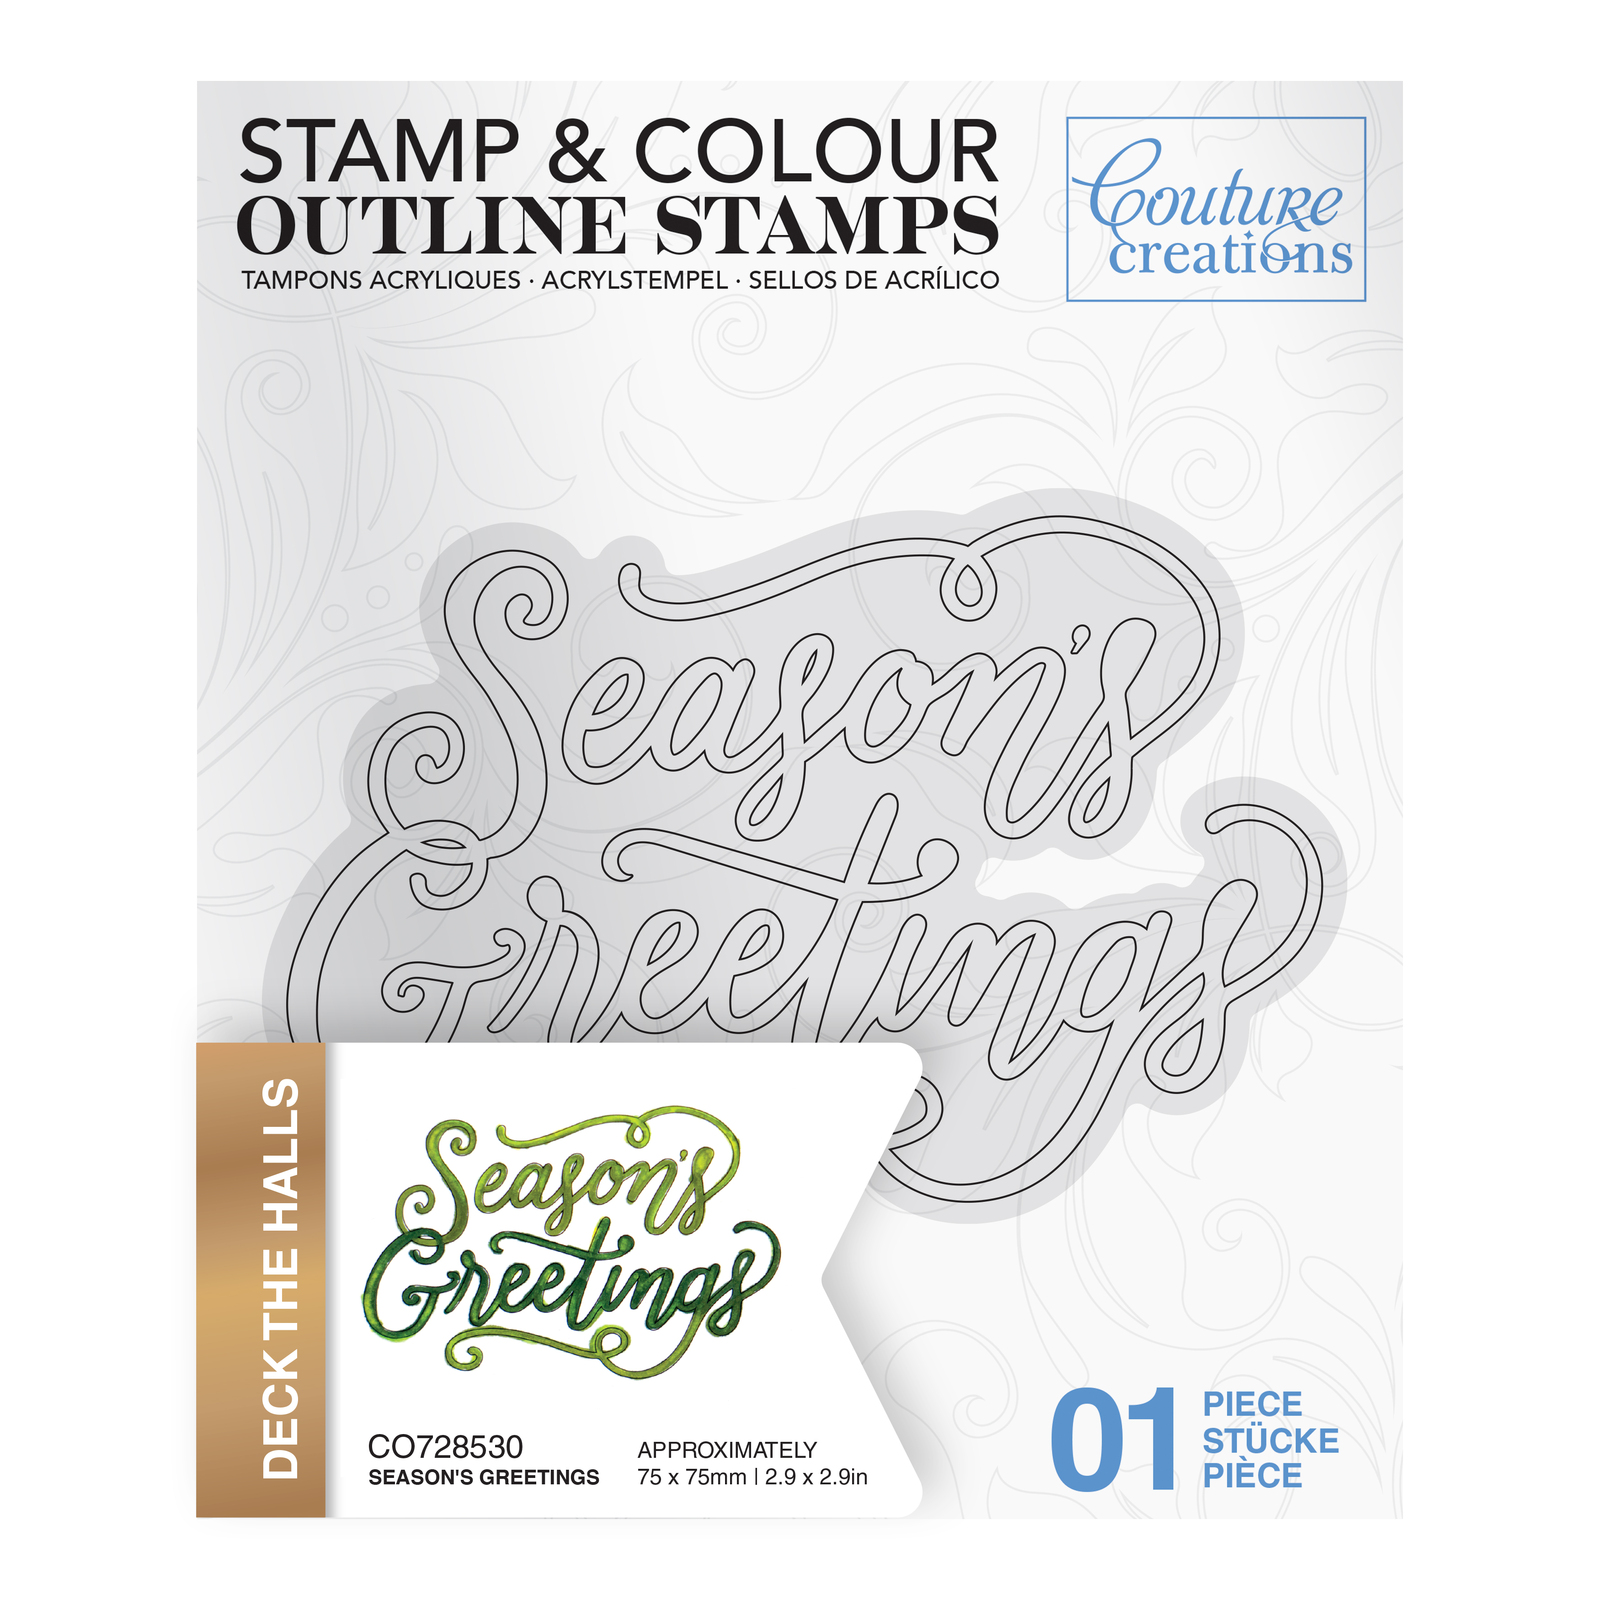 Couture Creations Stamp Deck the Halls Season's Greetings Outline (1pc)